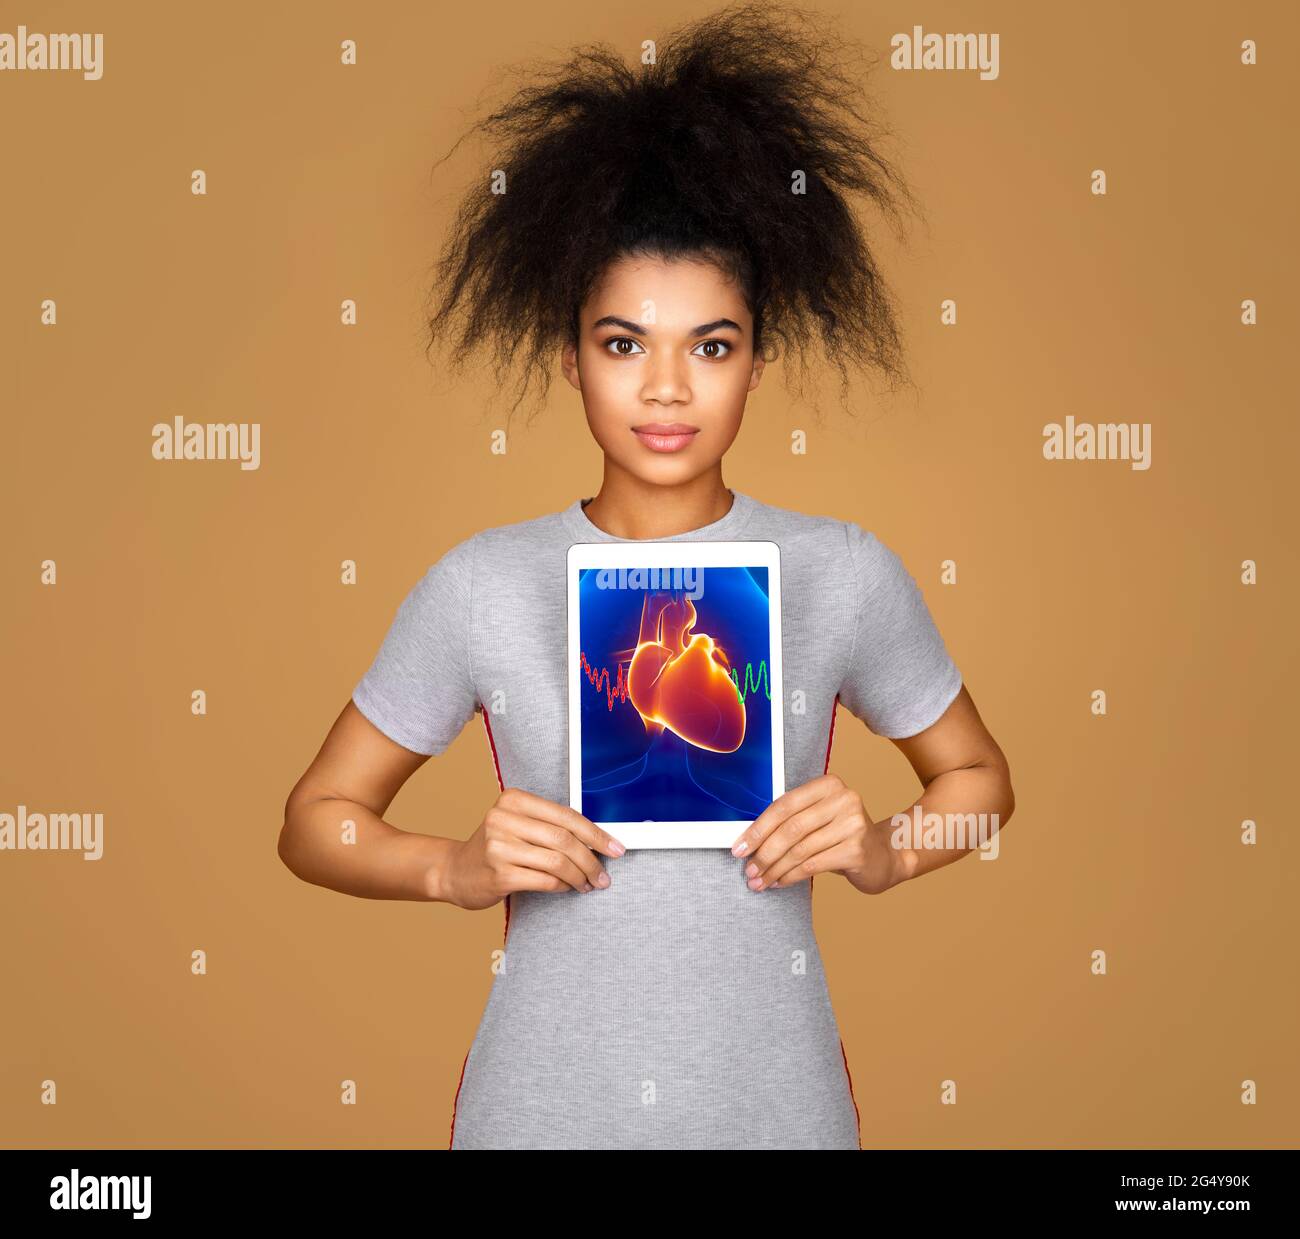 Girl shows the x-ray image of the heart. Photo of young girl with tablet in her hands on beige background. Medical concept Stock Photo